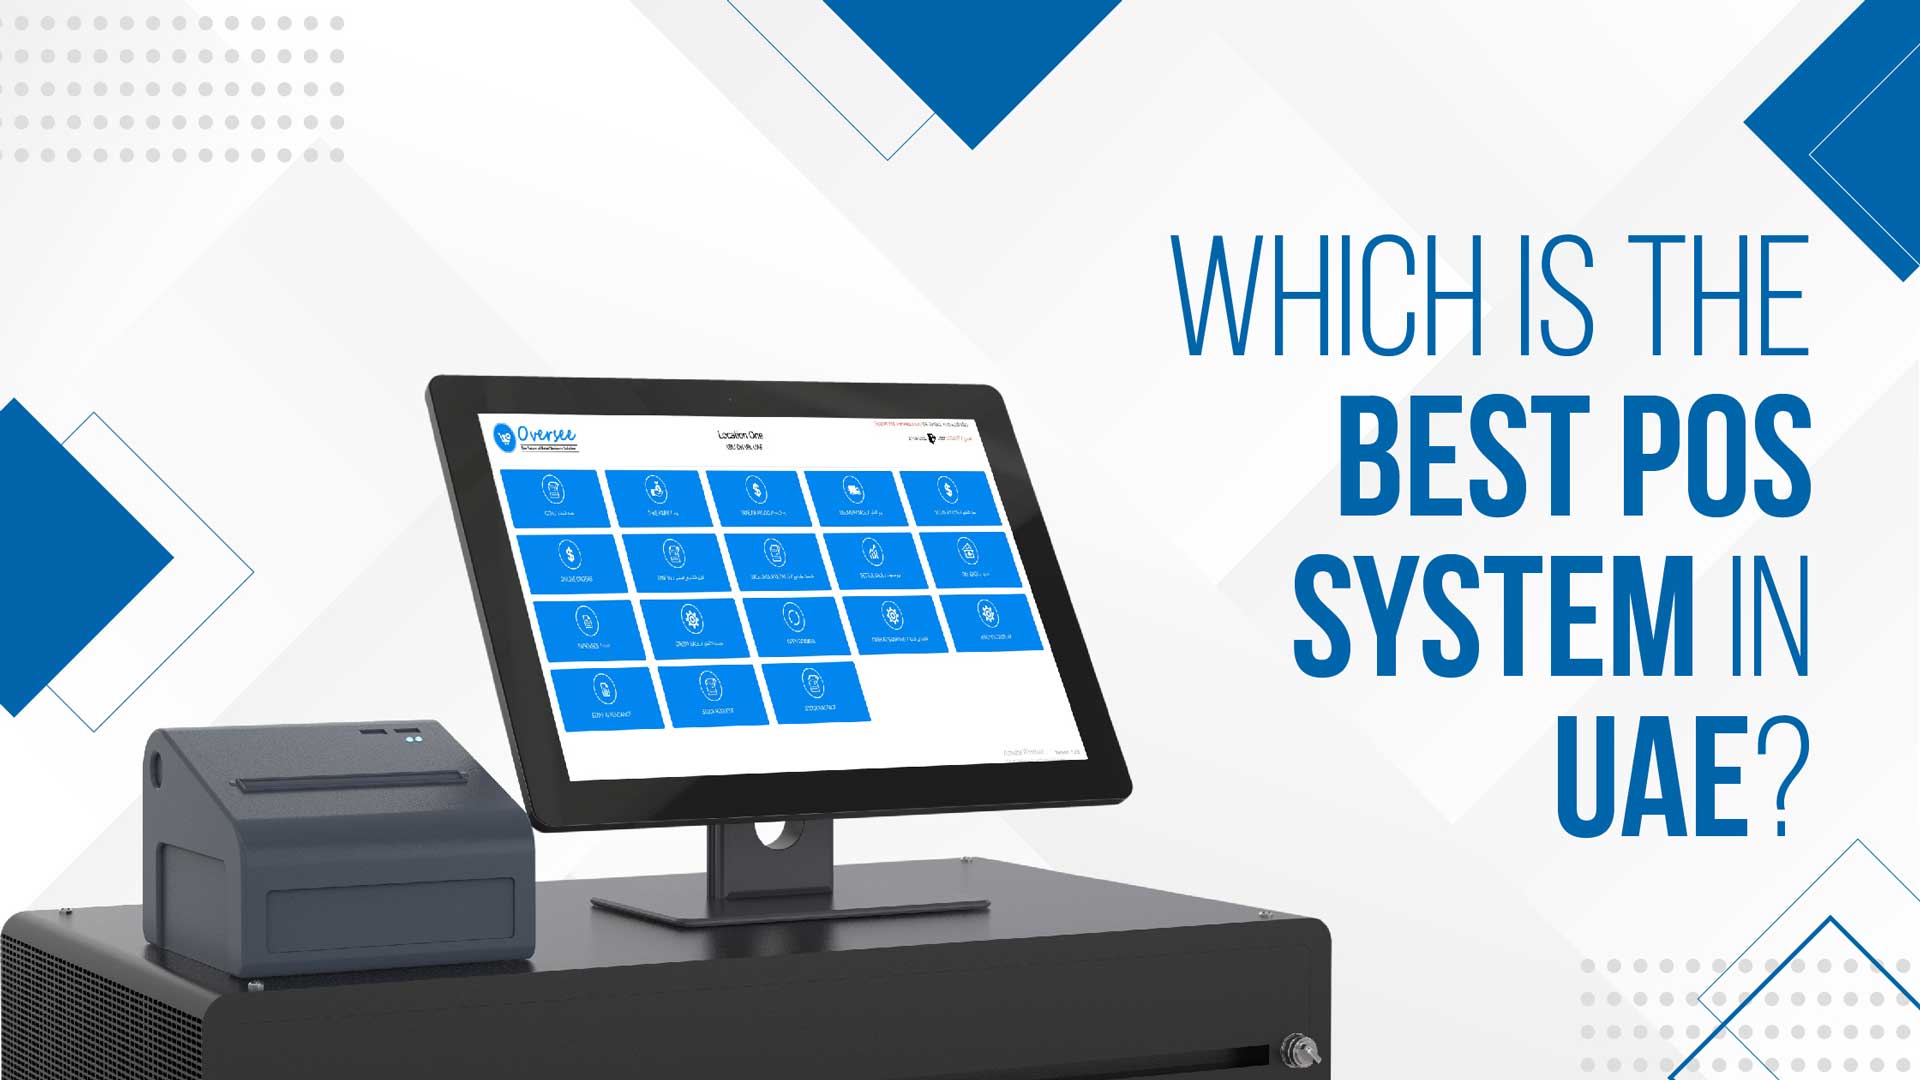 Which is the Best POS system in UAE?